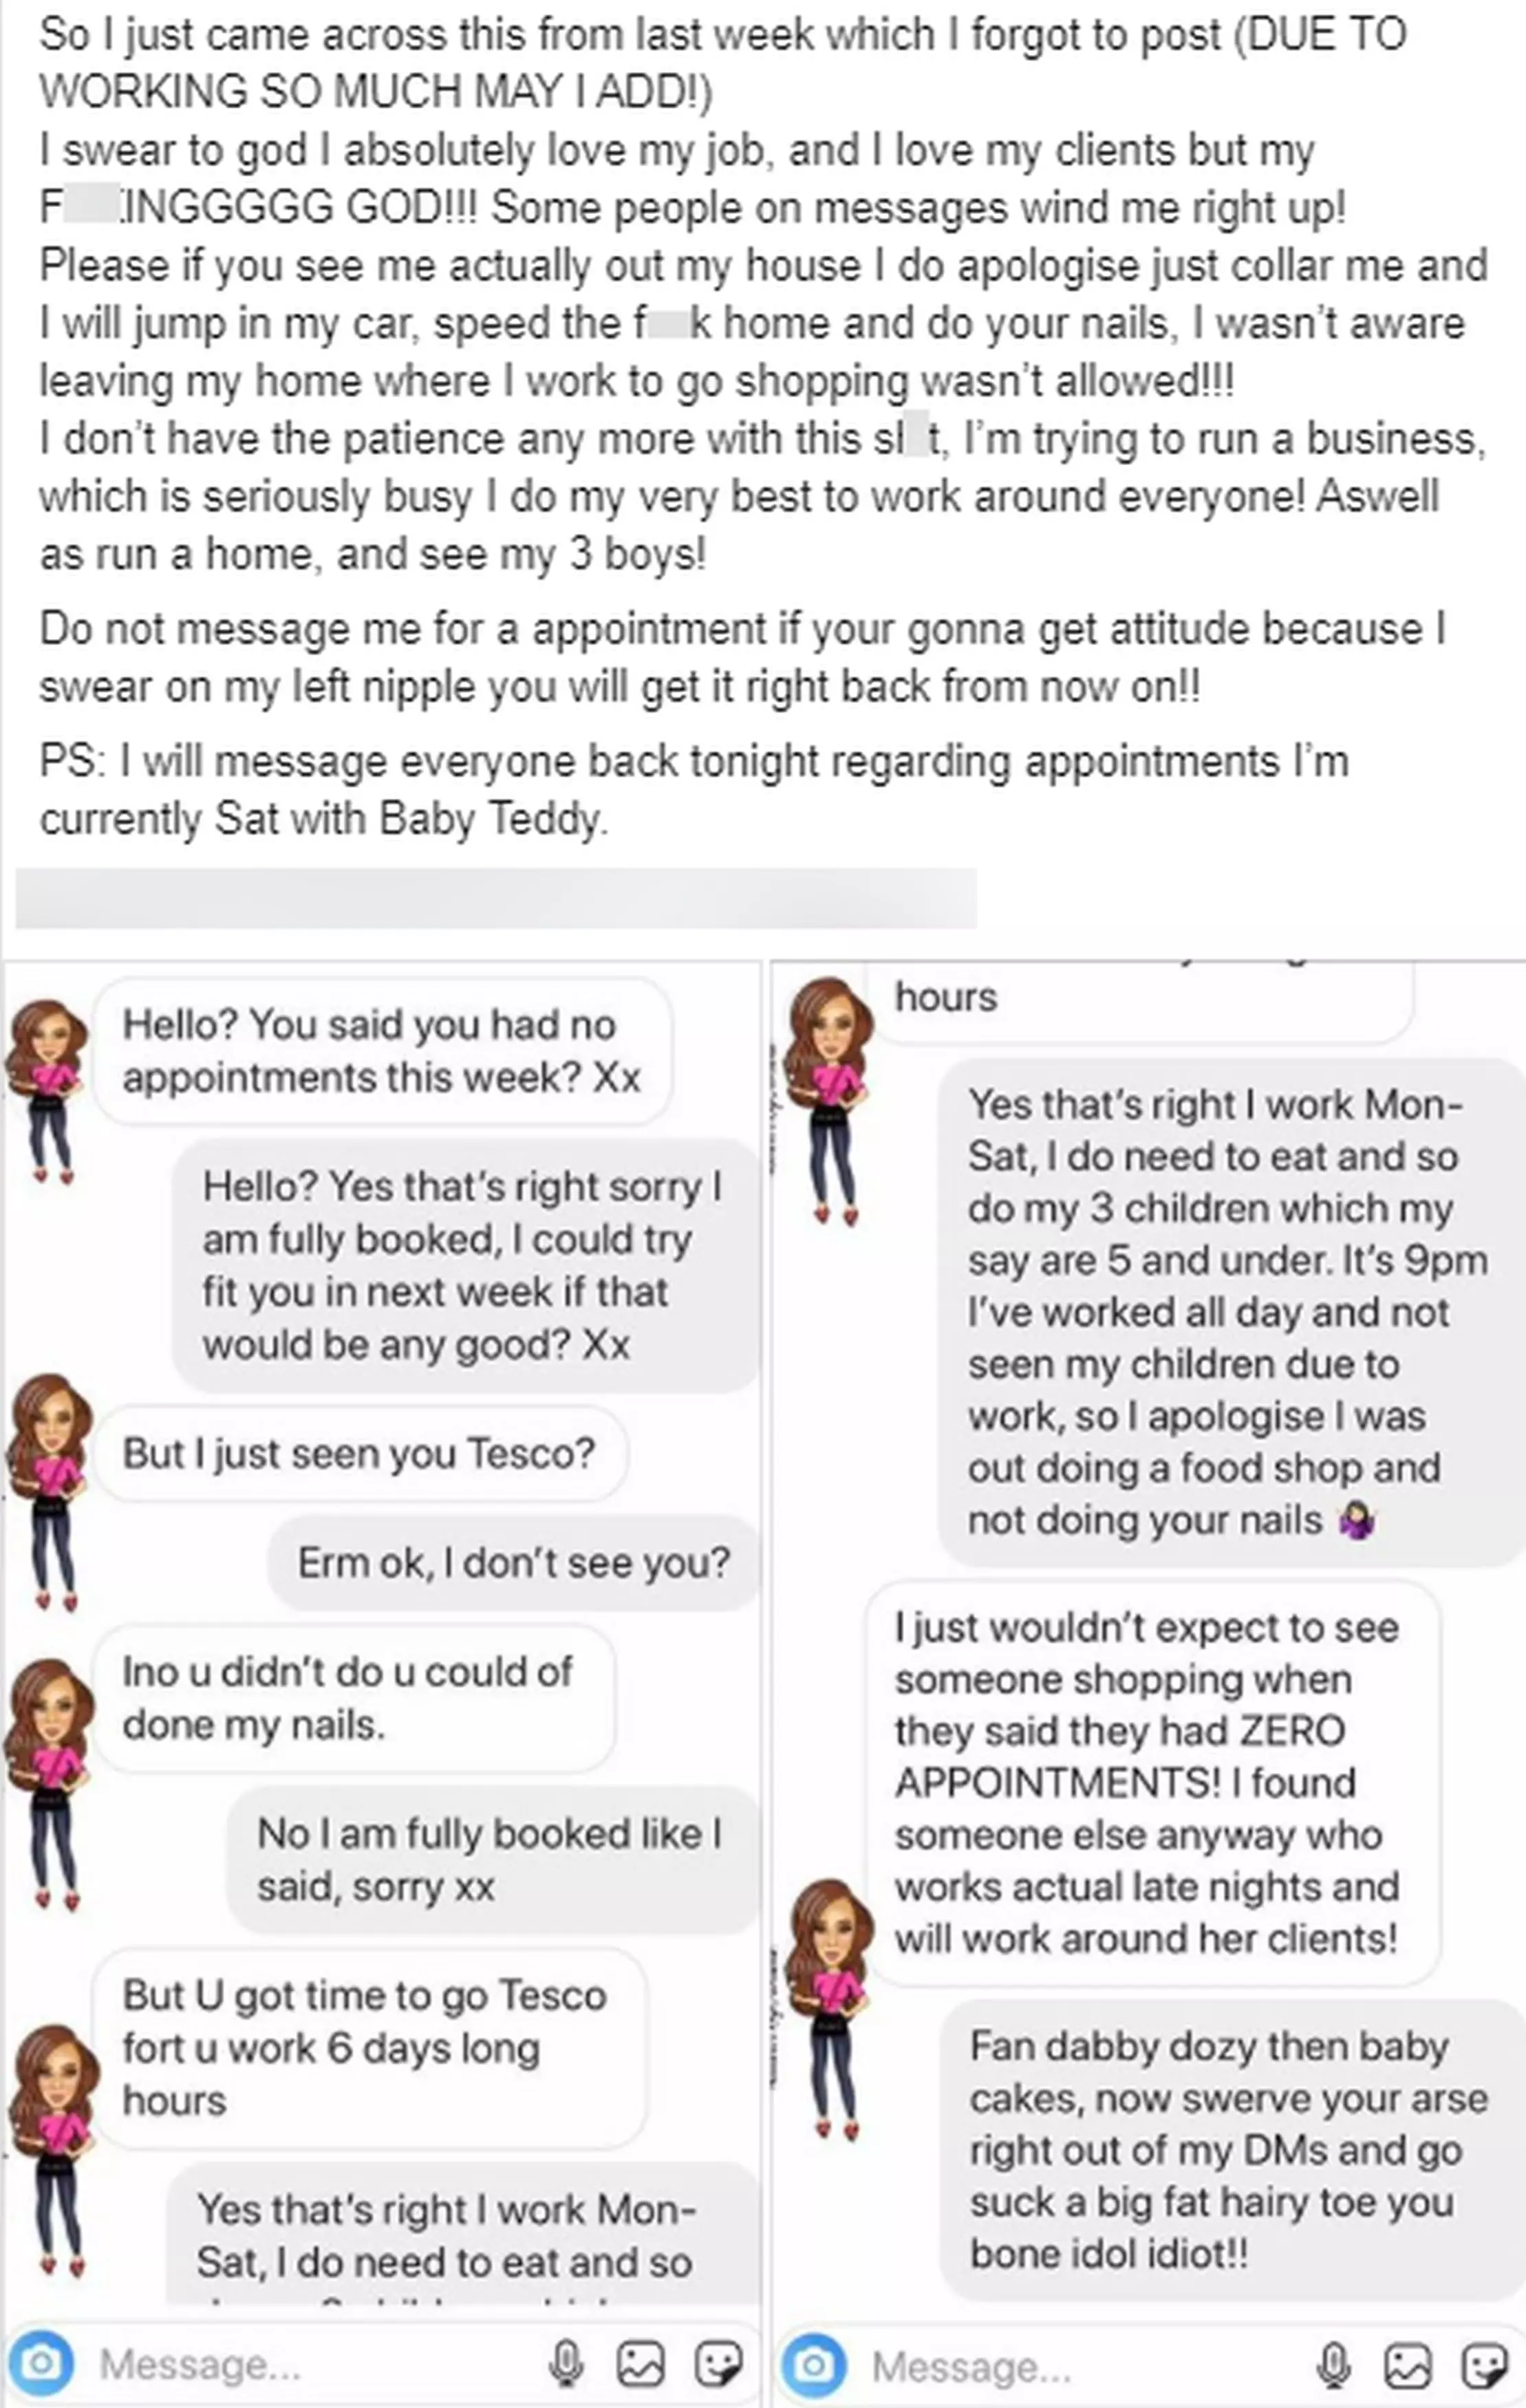 Danielle posted screenshots of the exchange on Facebook, writing "Don't message me for an appointment if your gonna get attitude [sic]". (